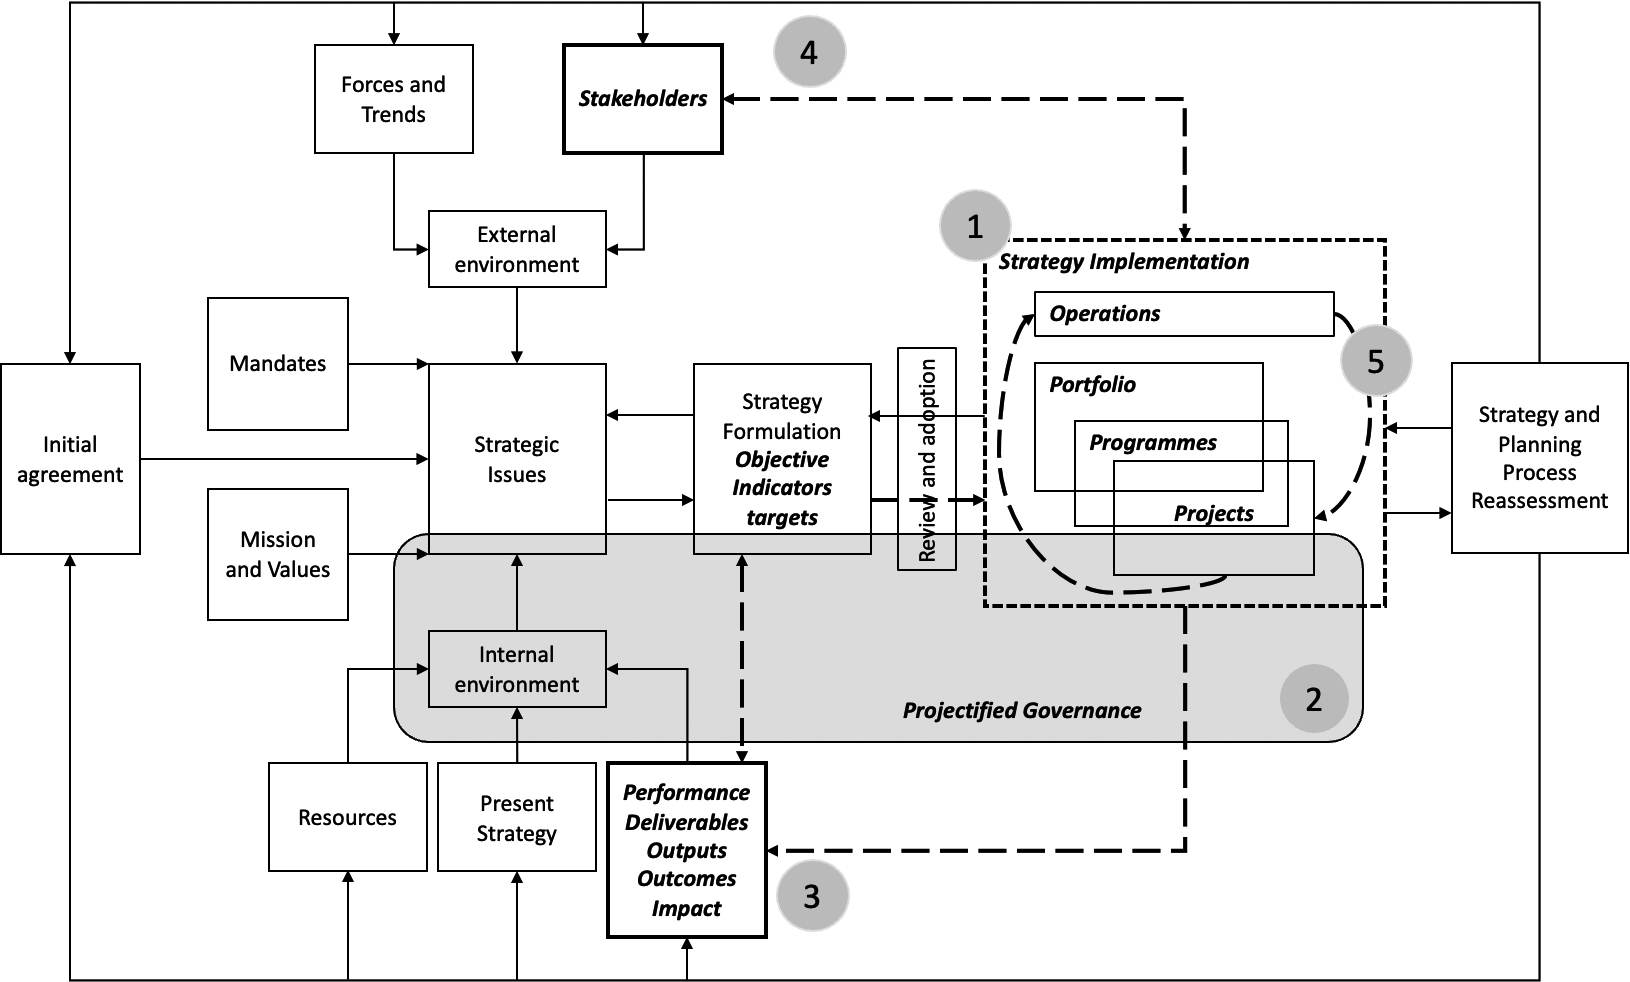 An agile strategic planning and management model for public organizations, based on PPPM logics integration. Adapted from Bryson (2018).